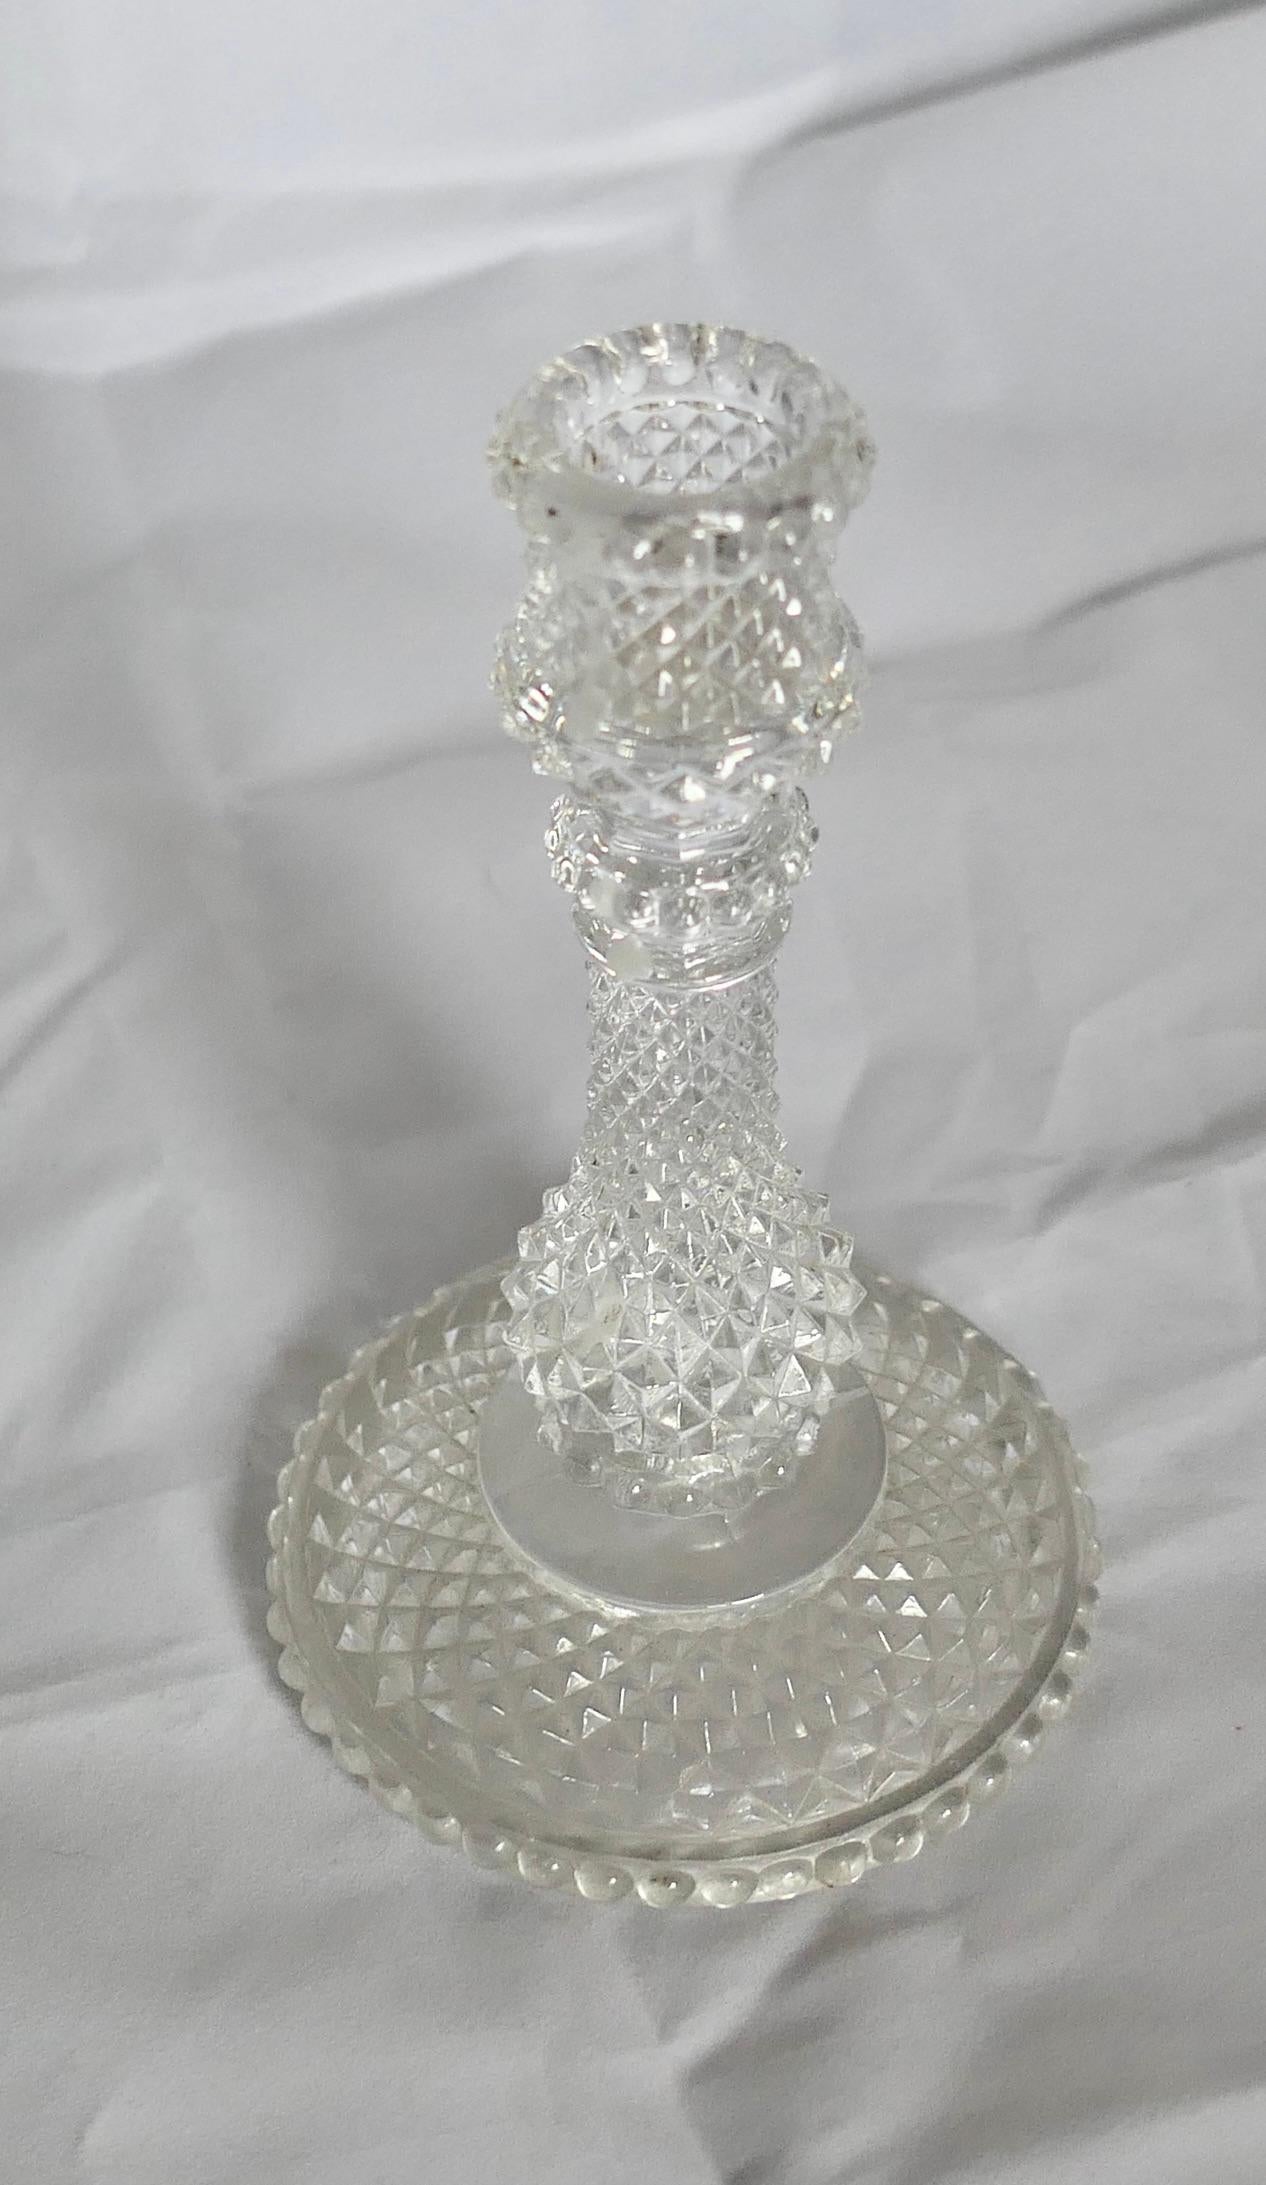 Belle Époque A Pair of Dainty Baccarat Crystal Zenith Candlesticks  A Lovely Pair of Table Ca For Sale